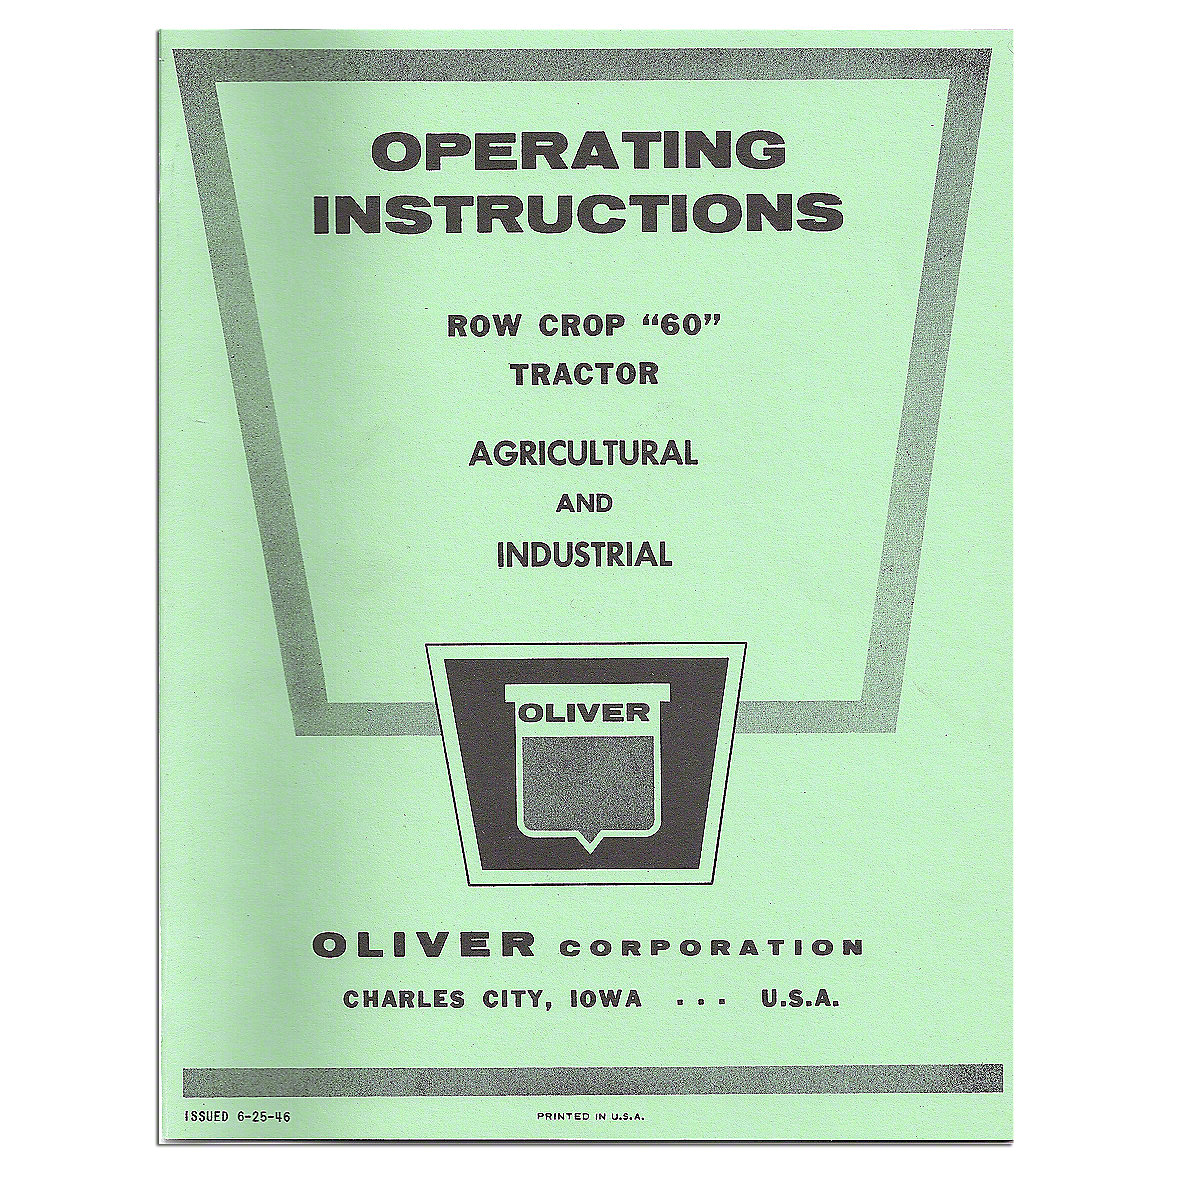 Fits: 60 

This operator and parts manual reprint has 44 pages, is 8-1/2 x 11 and includes the wiring diagram.